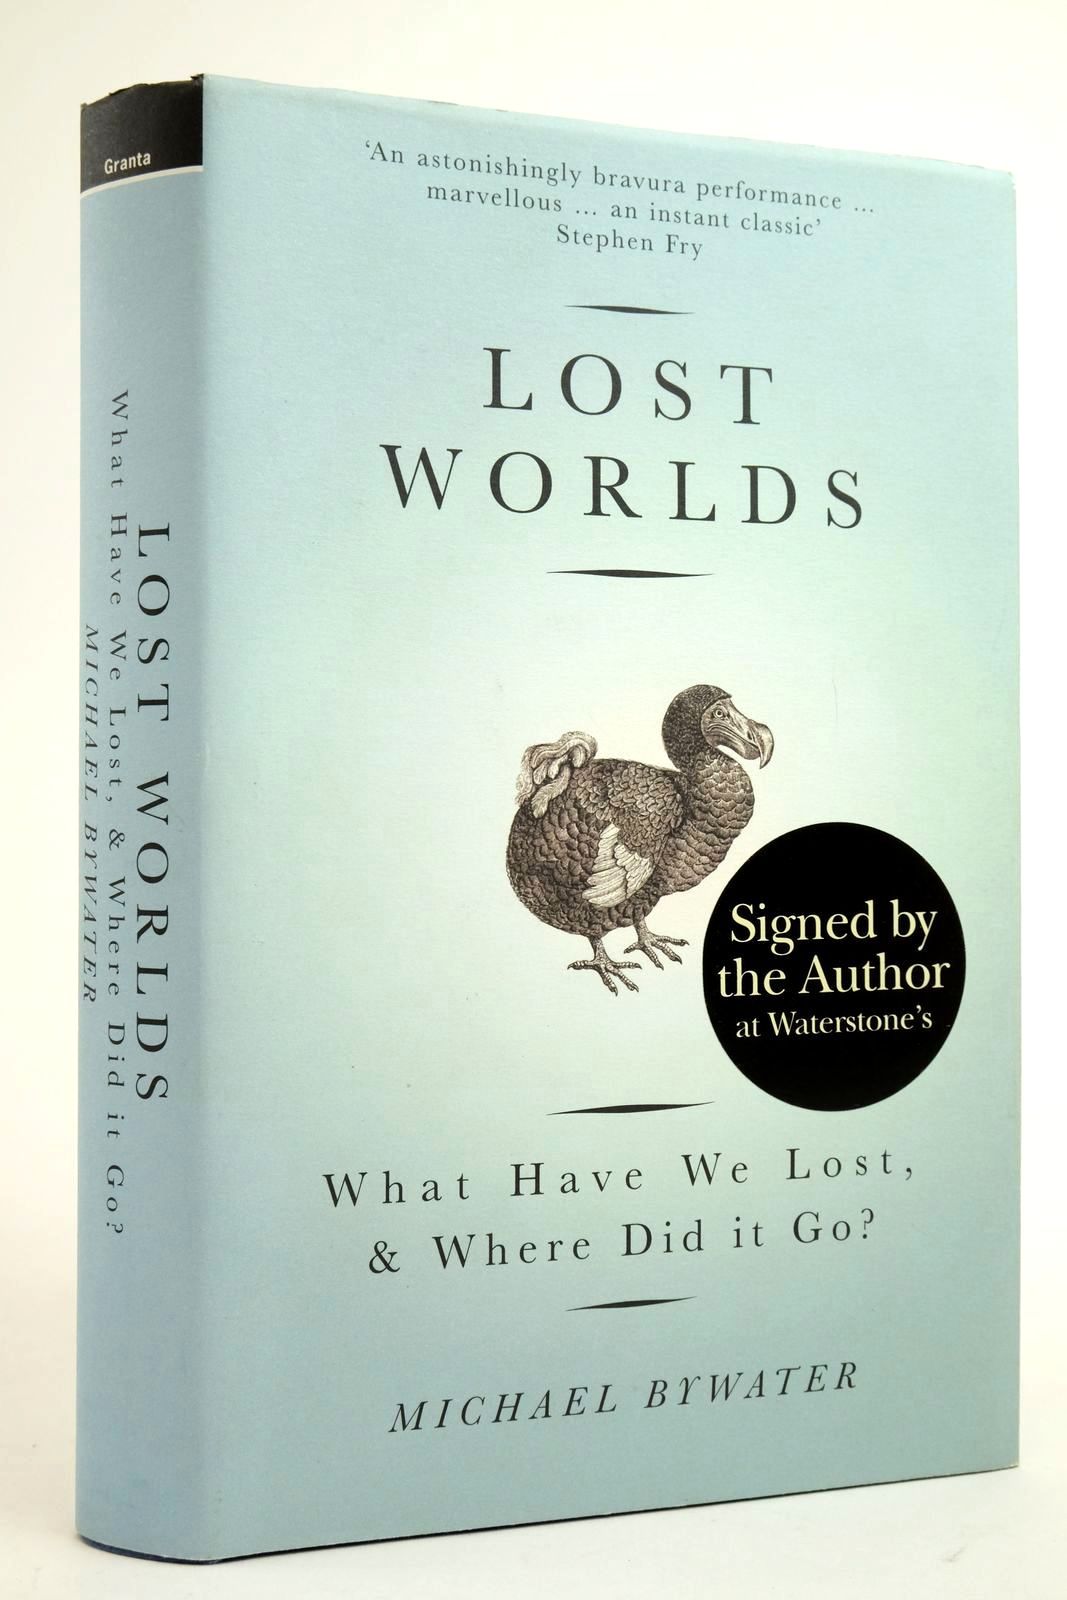 Photo of LOST WORLDS: WHAT HAVE WE LOST, & WHERE DID IT GO? written by Bywater, Michael published by Granta Books (STOCK CODE: 2135981)  for sale by Stella & Rose's Books